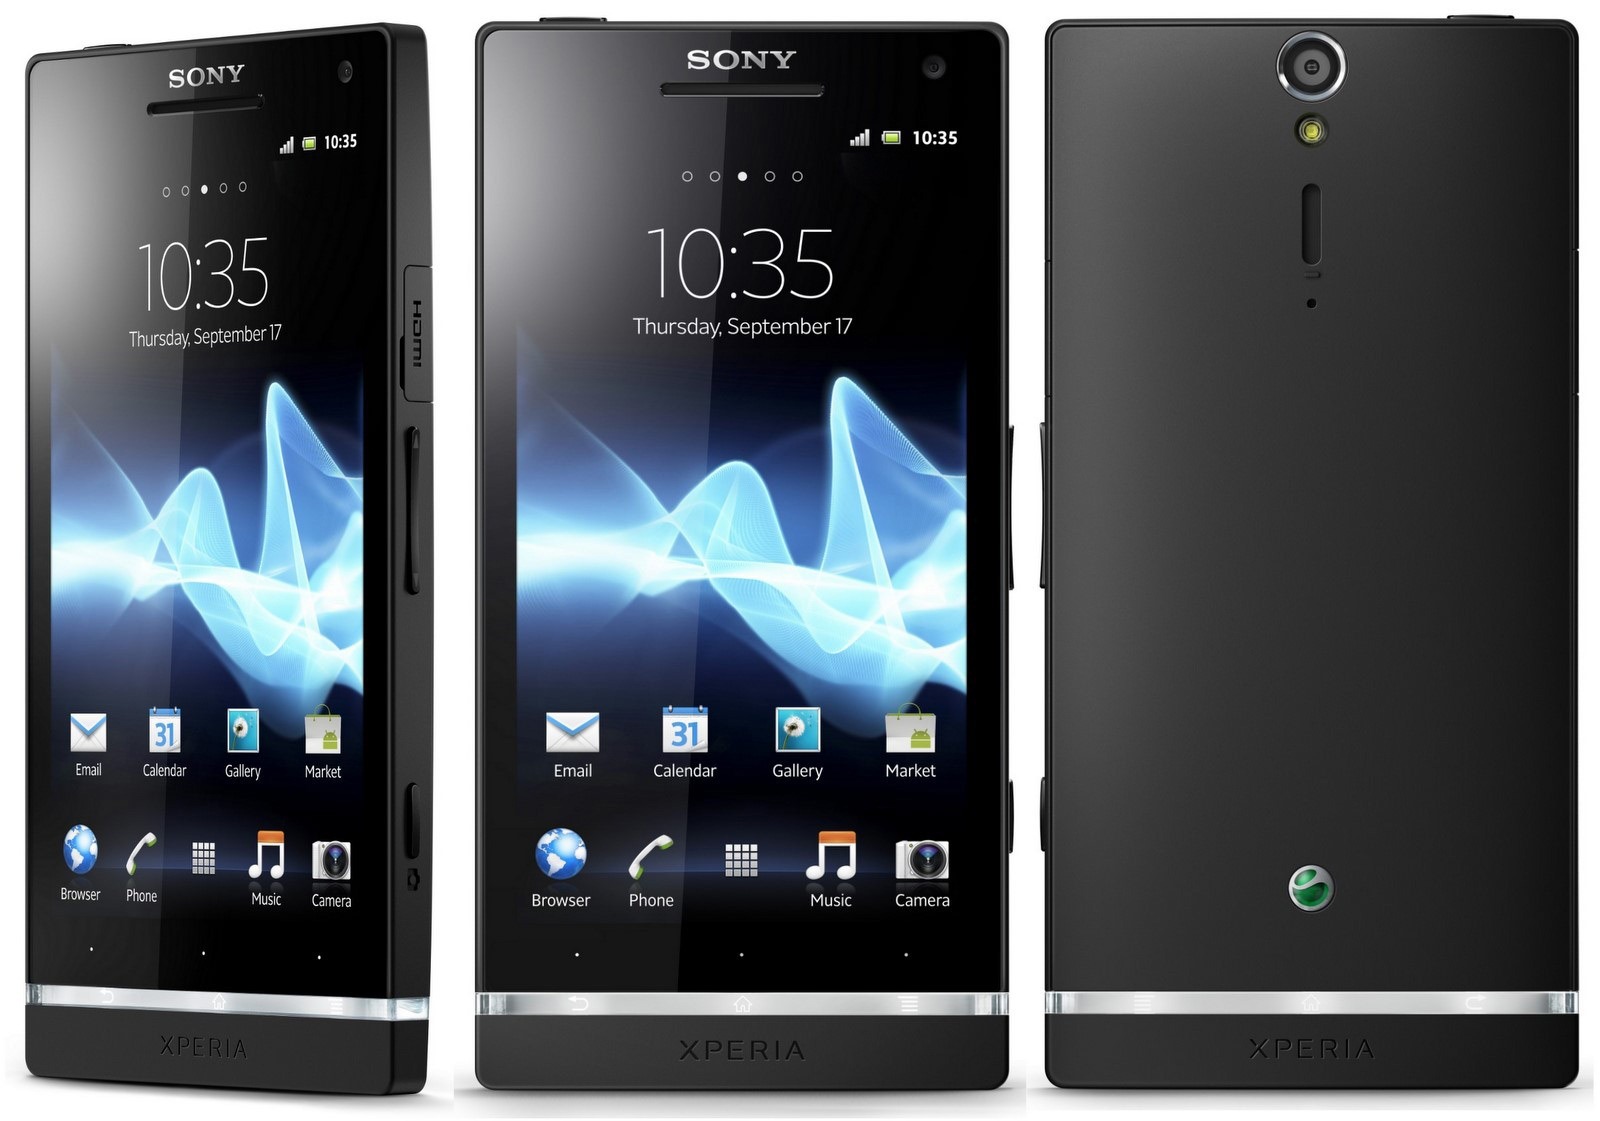 Detail Firmware Sony Xperia S Nomer 2